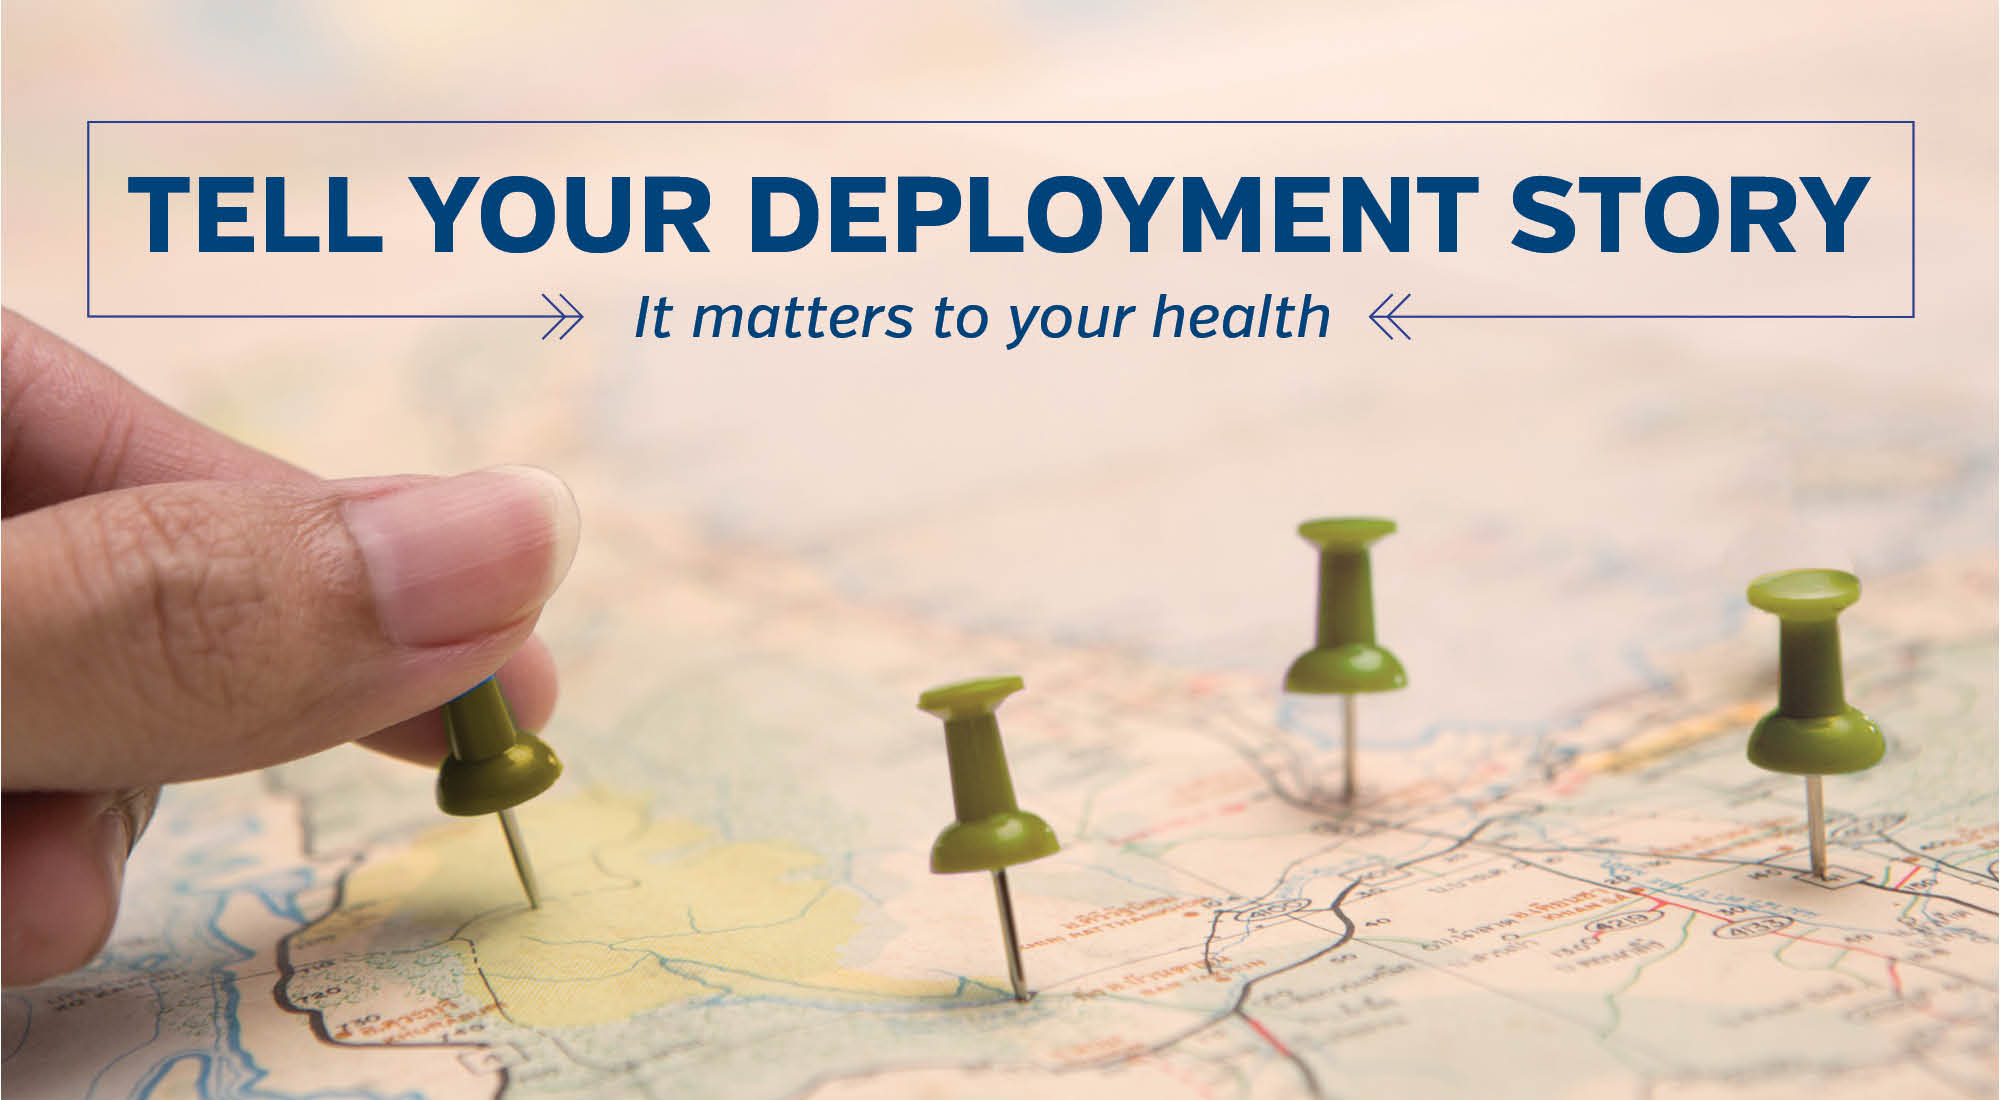 Tell your deployment story, it matters to your health